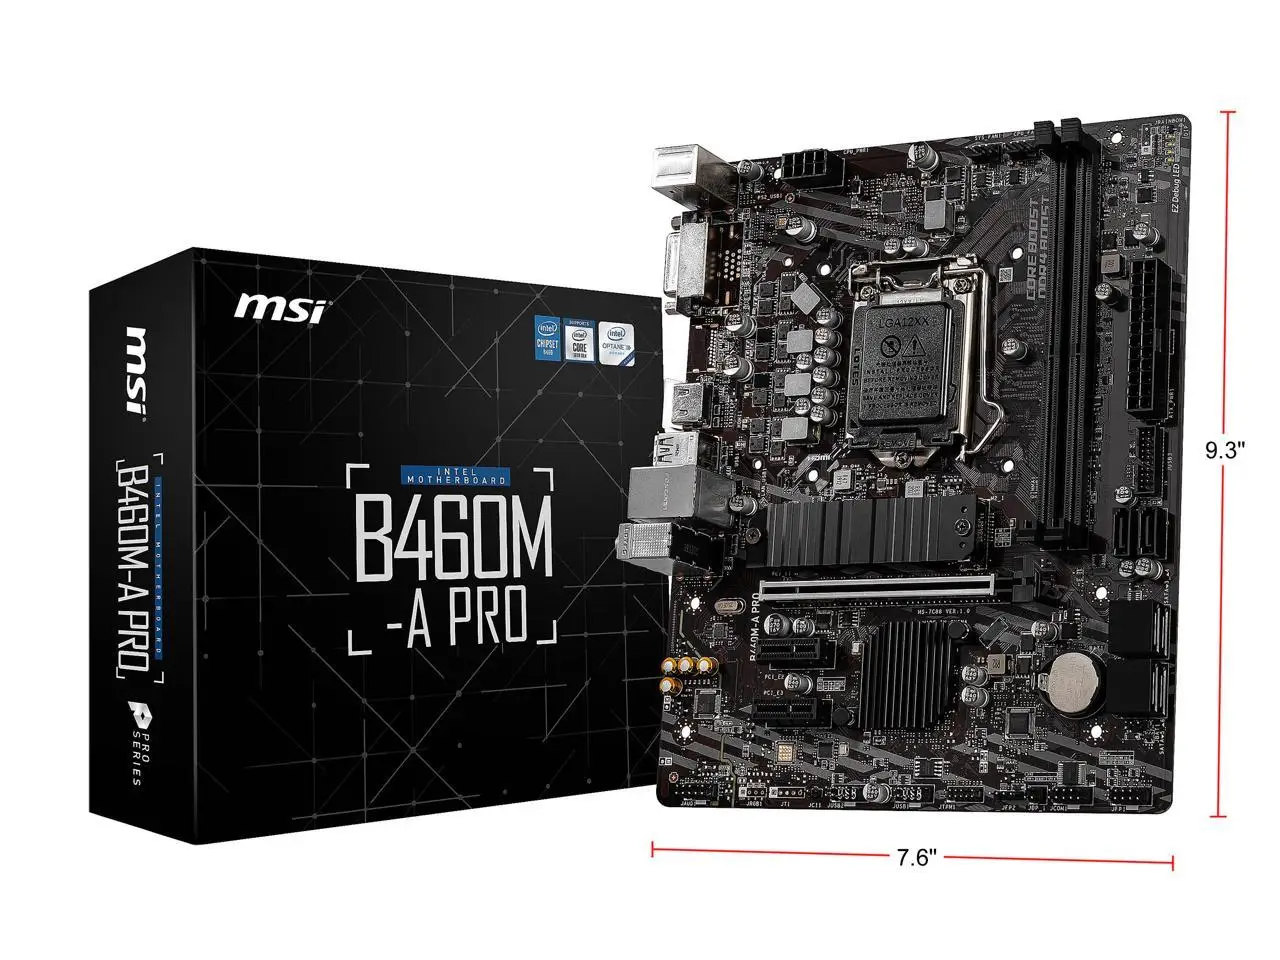 

MSI B460M-A PRO Supports 10th Gen Intel® Core LGA 1200 socket Supports DDR4 Memory, up to 2933(Max) MHz Turbo M.2